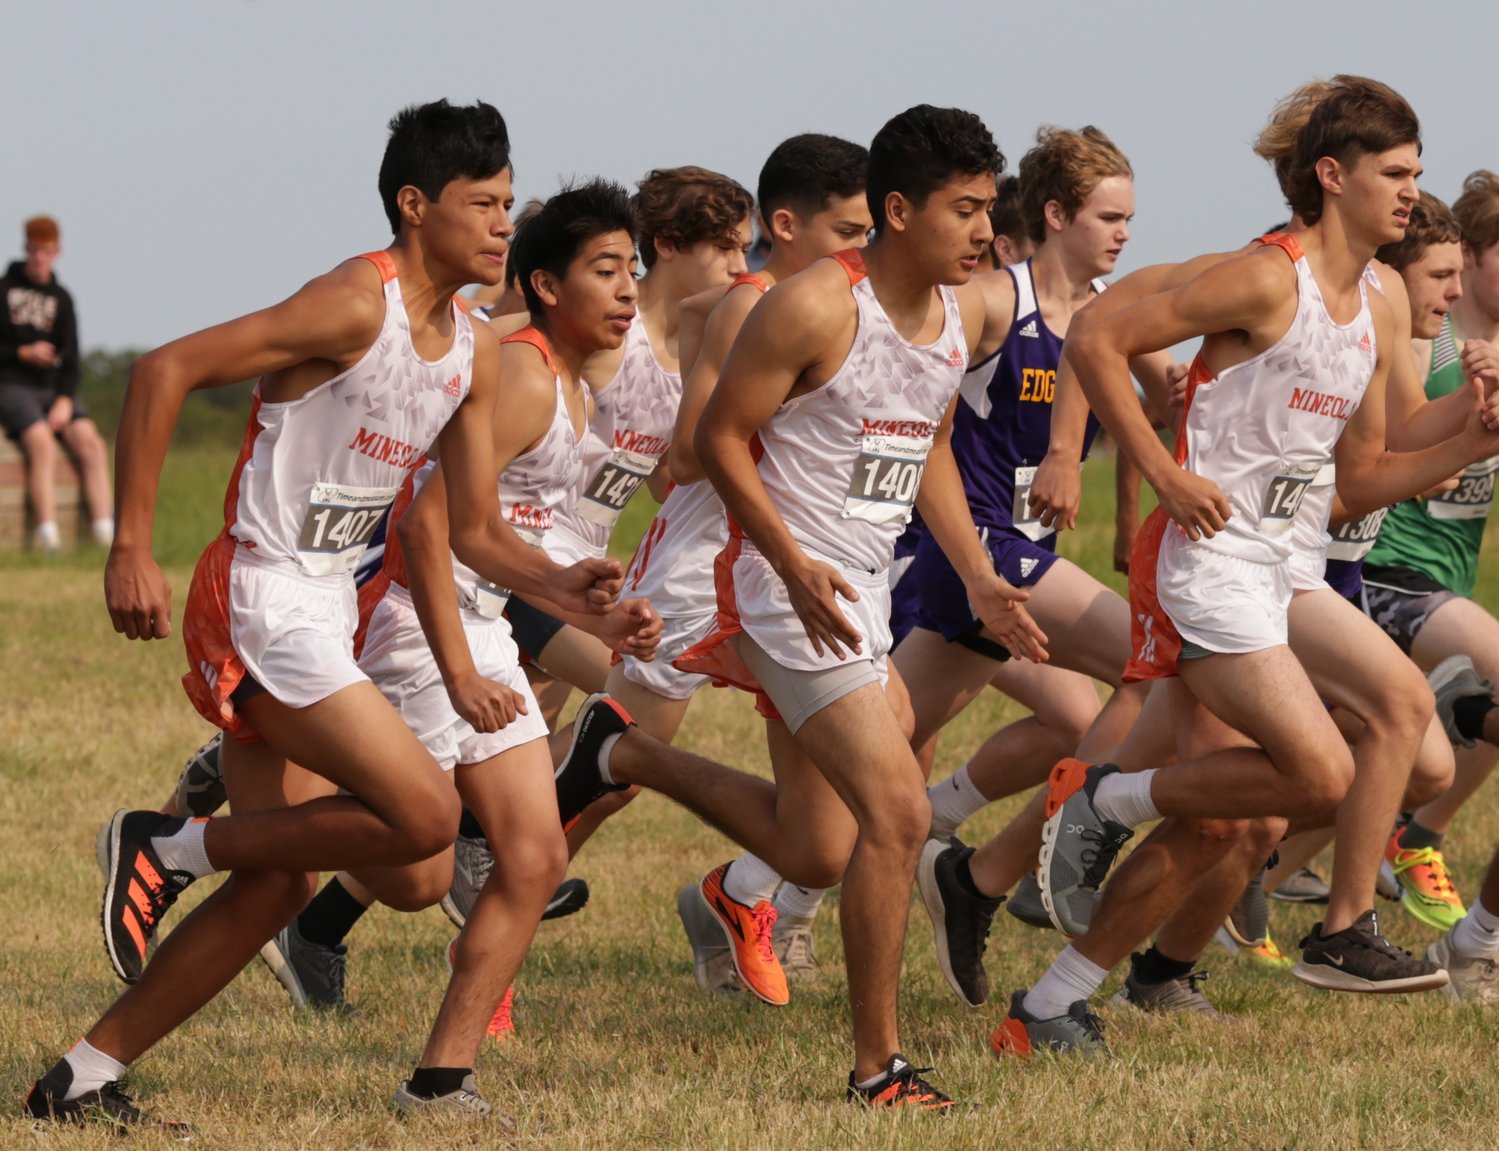 The Mineola boys cross country team strides out at the start of the Lindale Invitational. (Monitor photos by John Arbter)